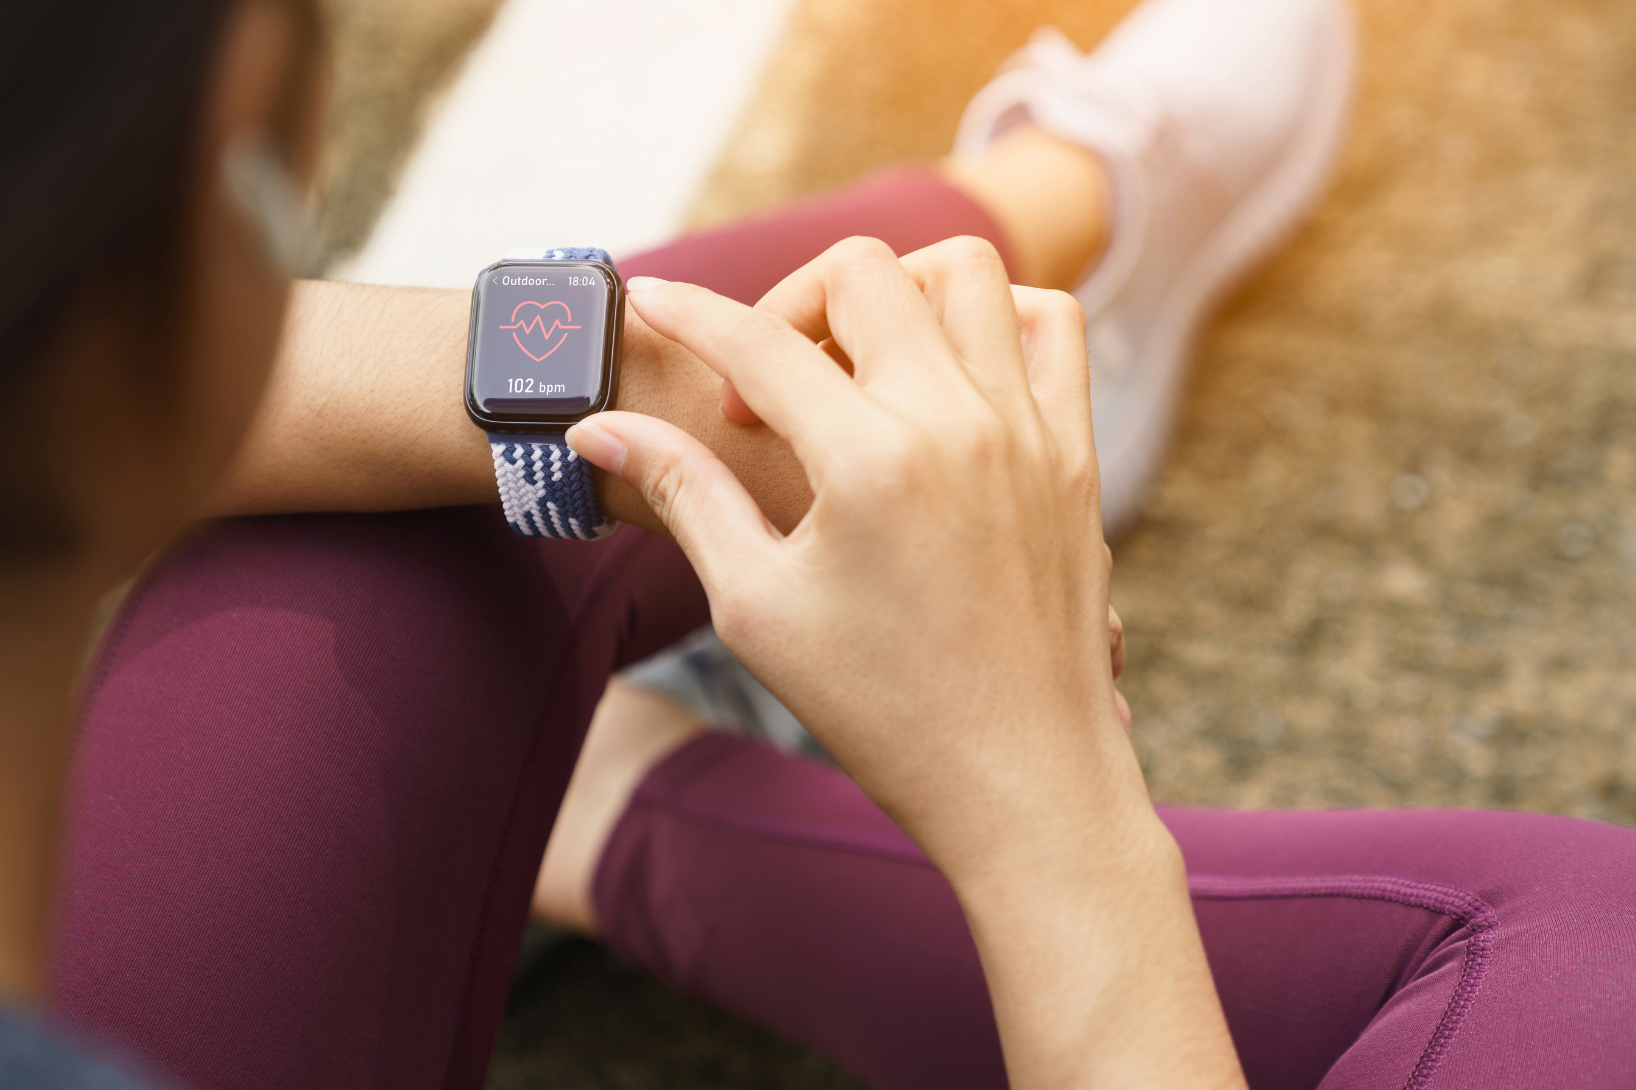 Wearables in Clinical Trials: Real Benefits Beyond the Hype